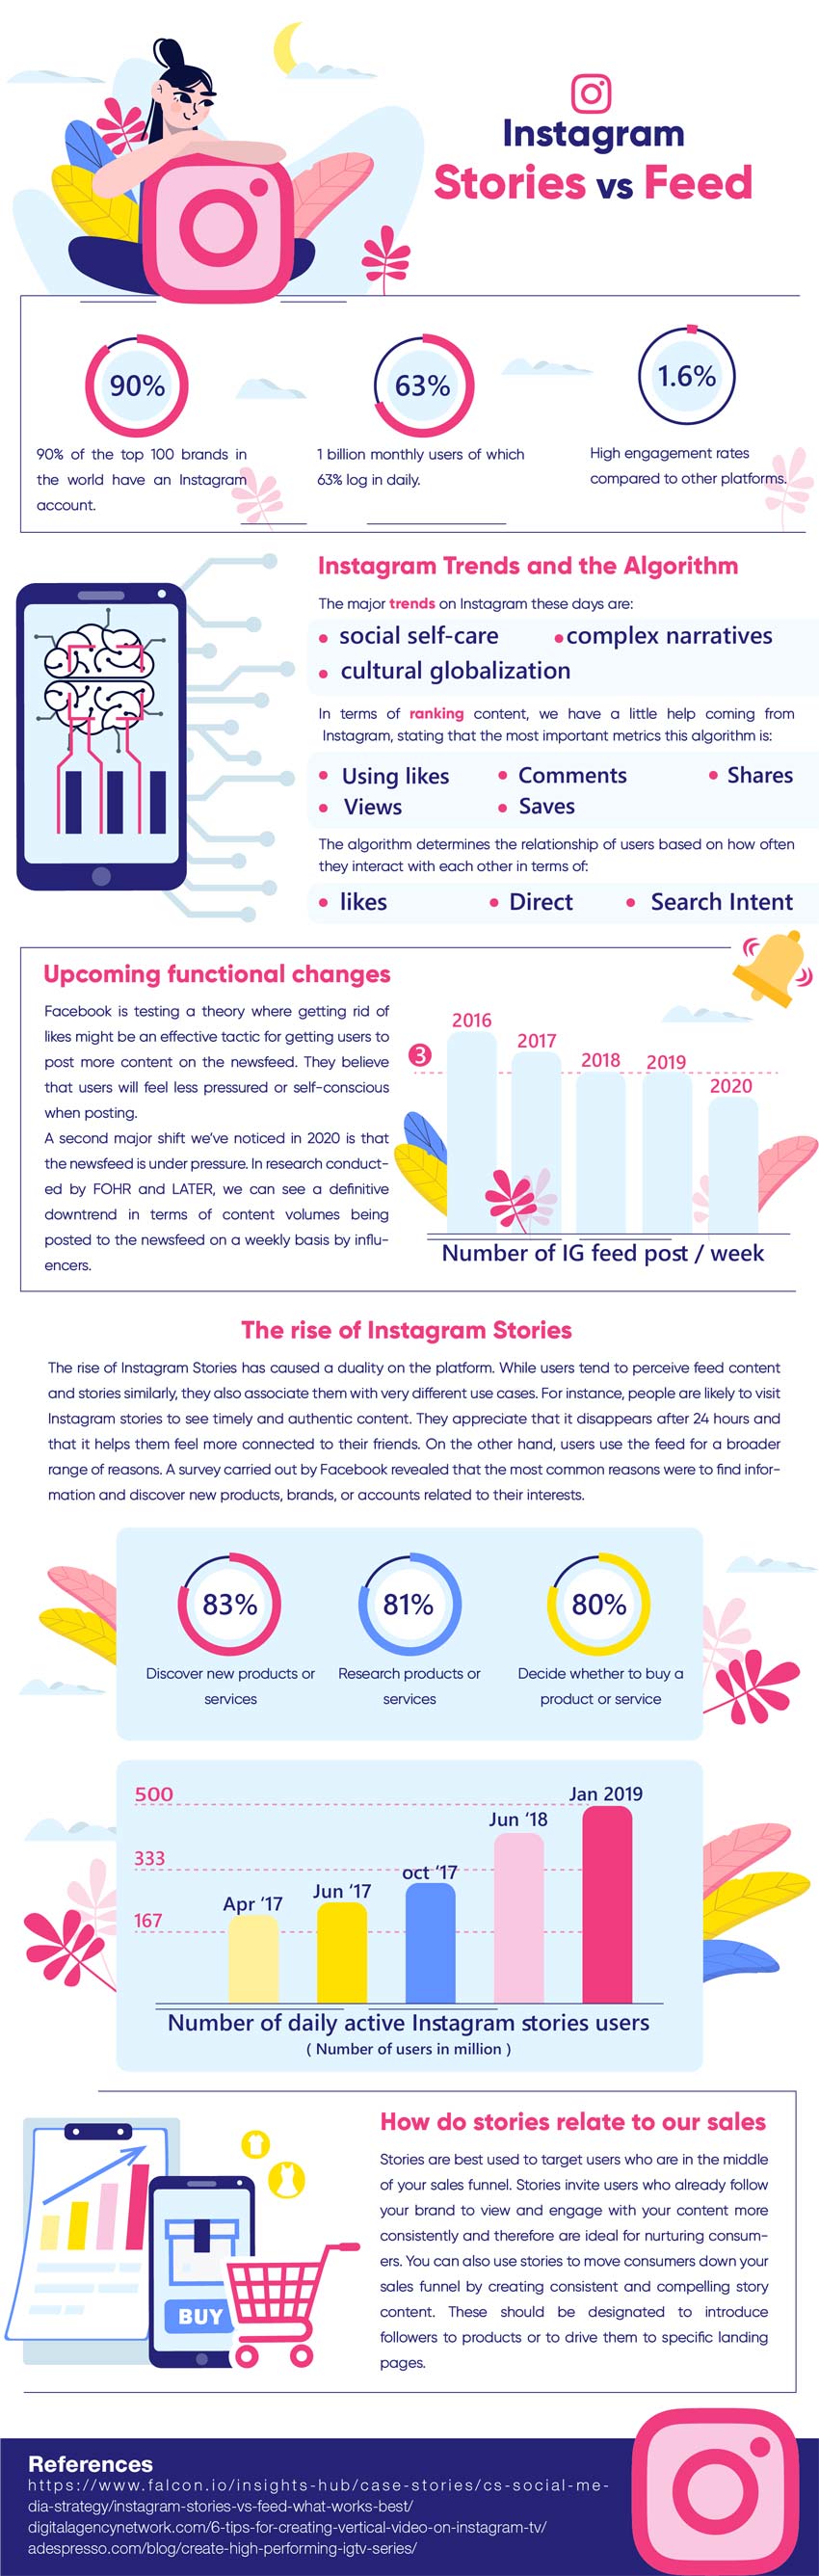 Instagram Stories vs Feed: What works best? [Infographic]